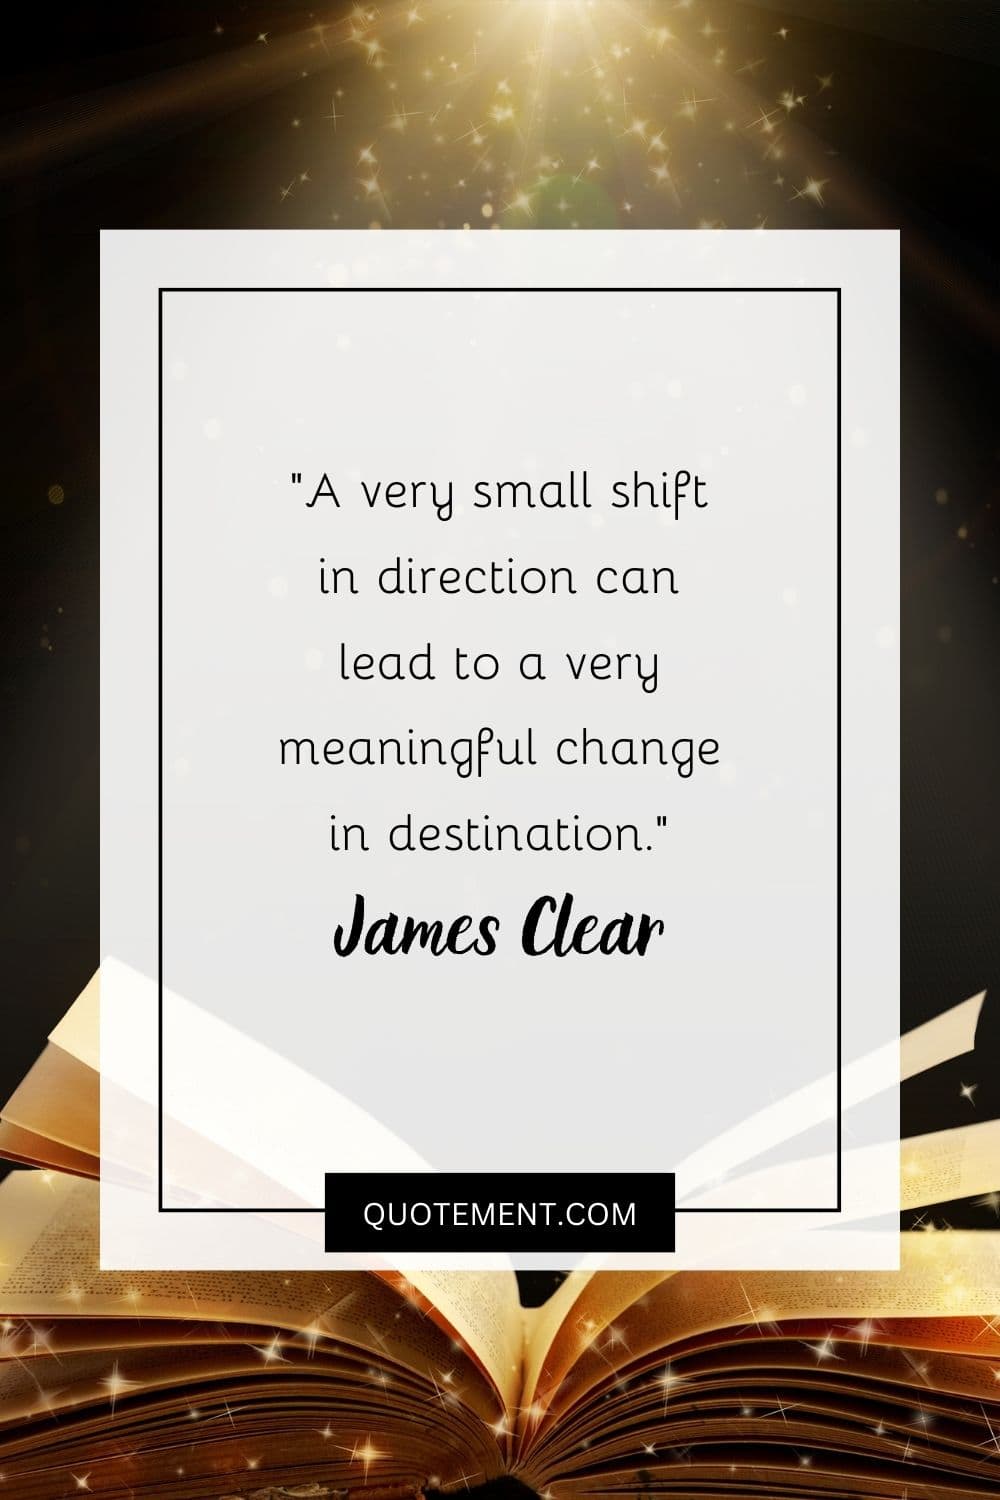 A very small shift in direction can lead to a very meaningful change in destination.